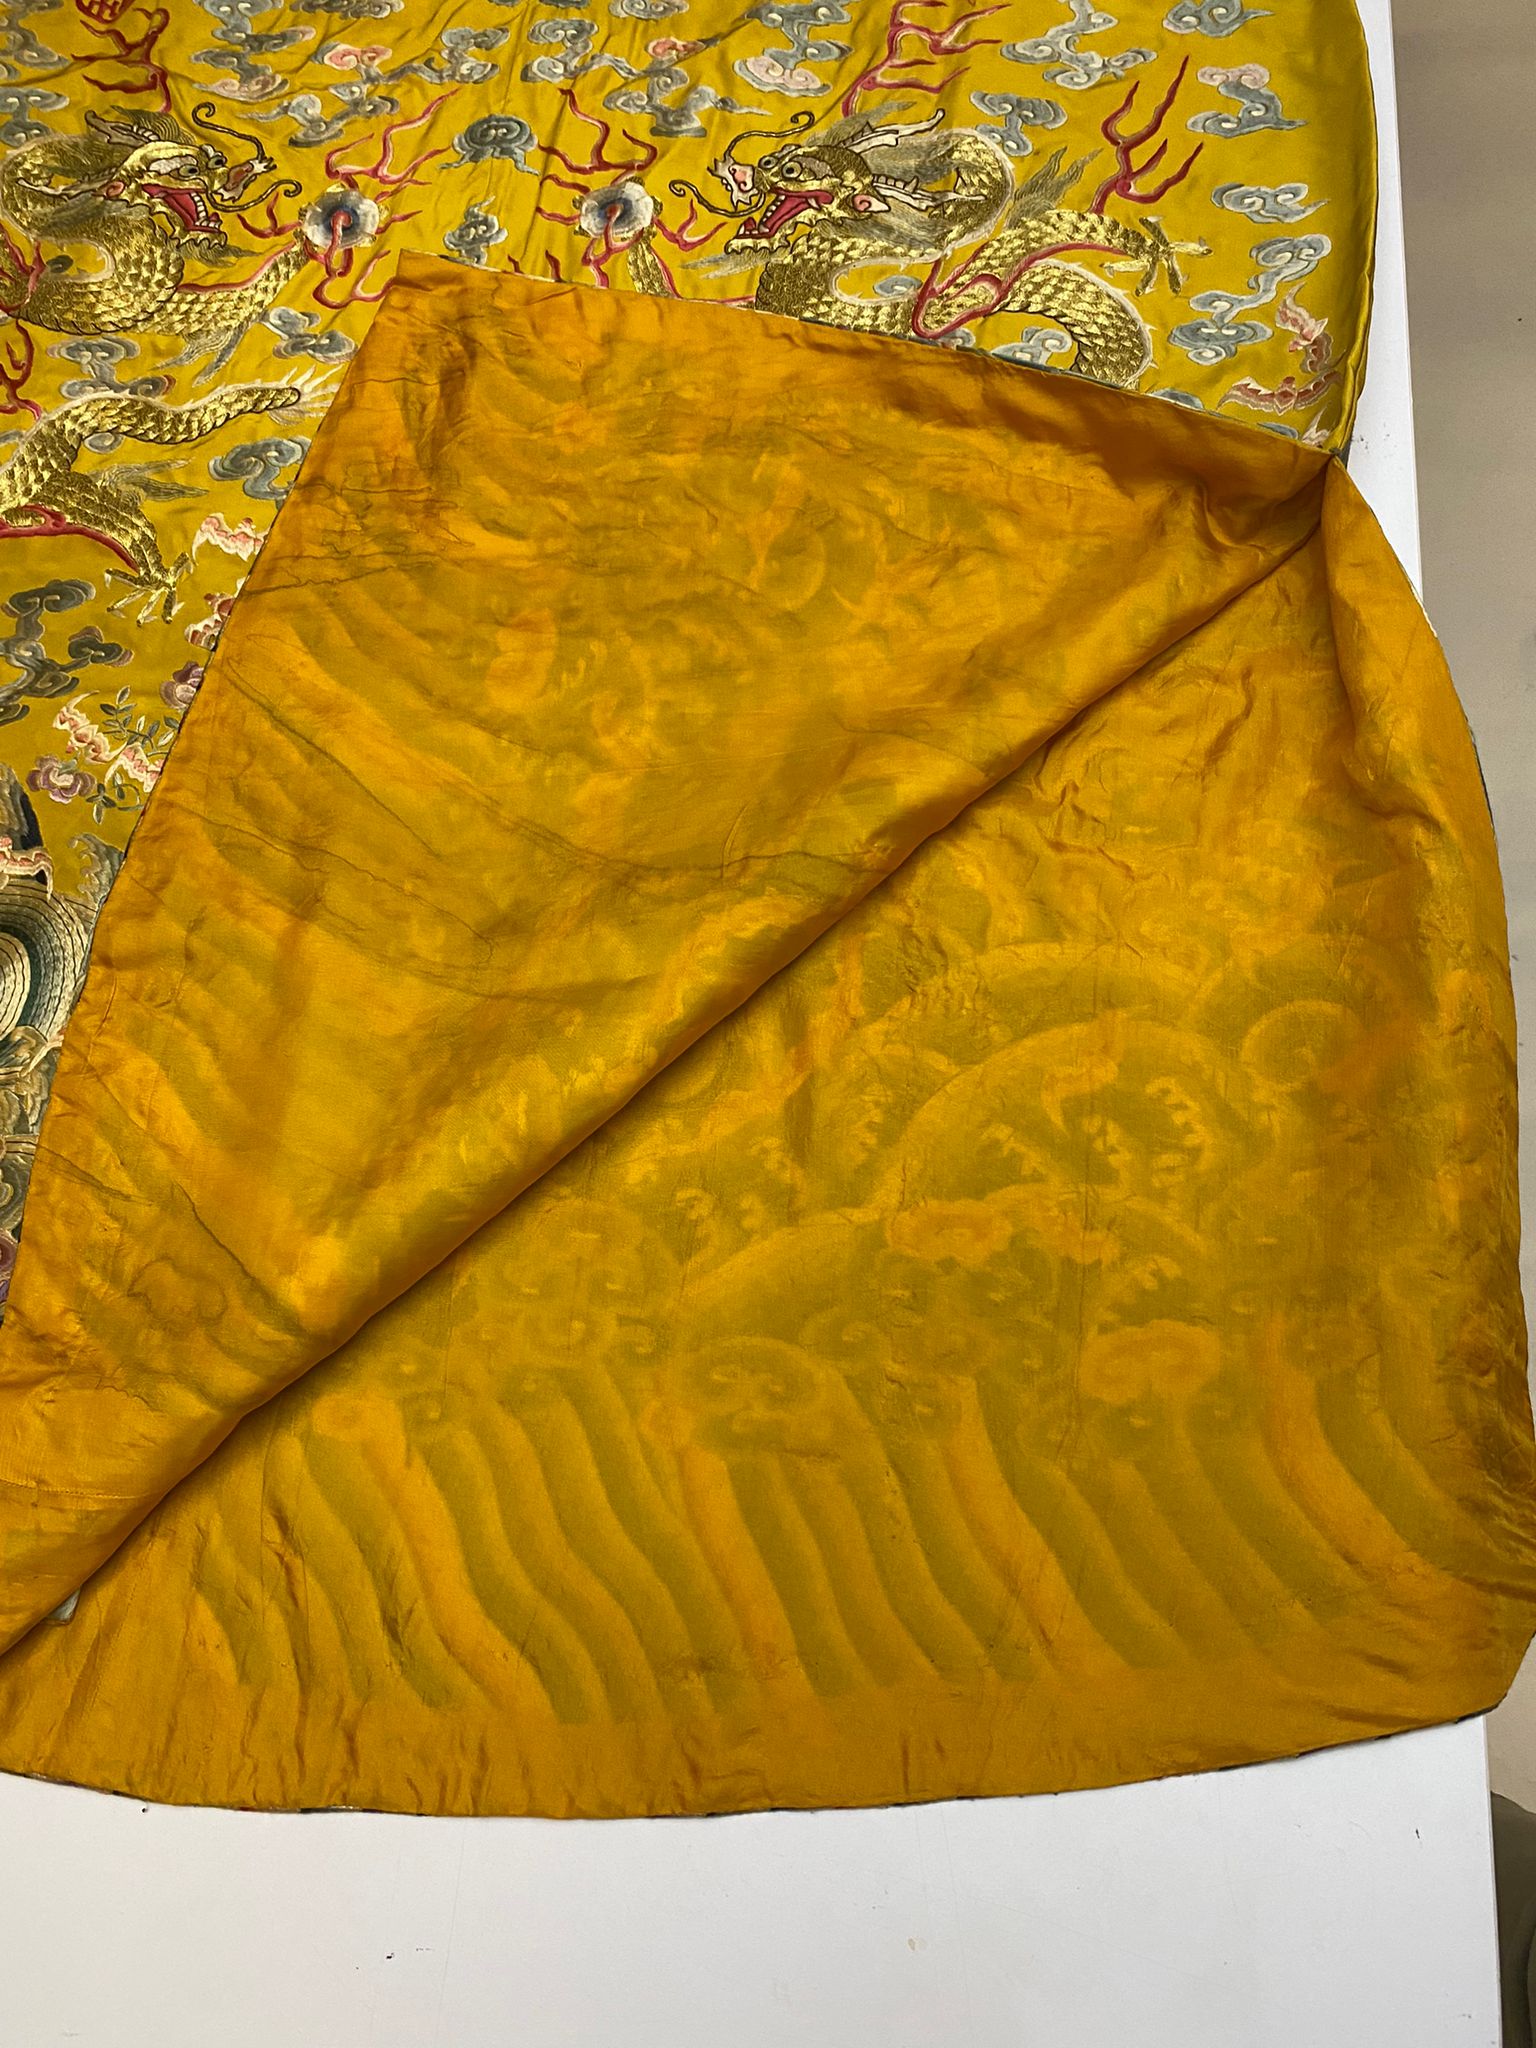 A CHINESE YELLOW EMBROIDERED SILK 'DRAGON' ROBE - Image 10 of 19